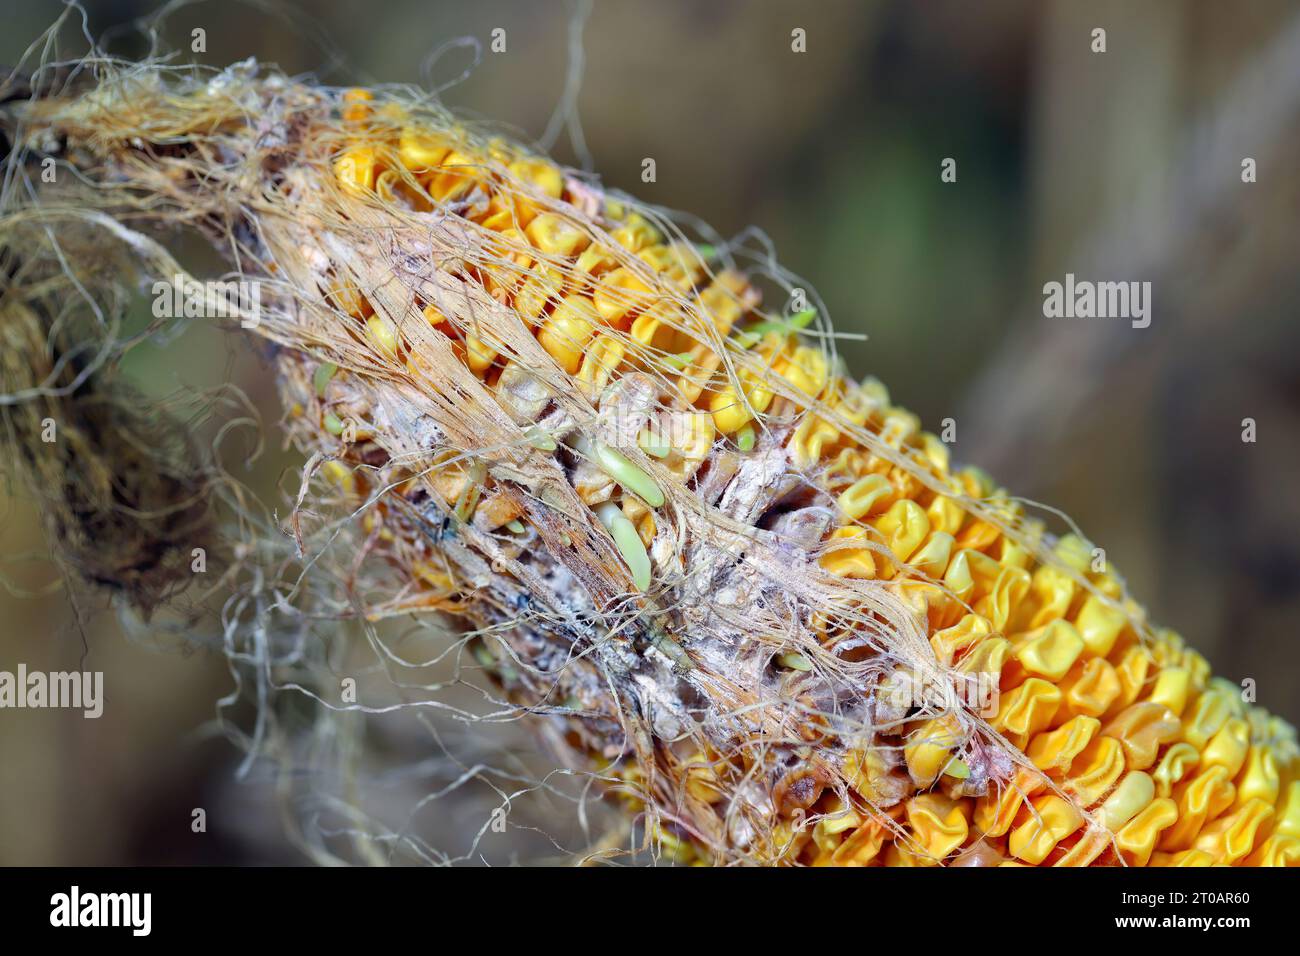 Corn, maize (Zea mays), damage by Fusarium. Germinating seeds on the corn cob. Stock Photo